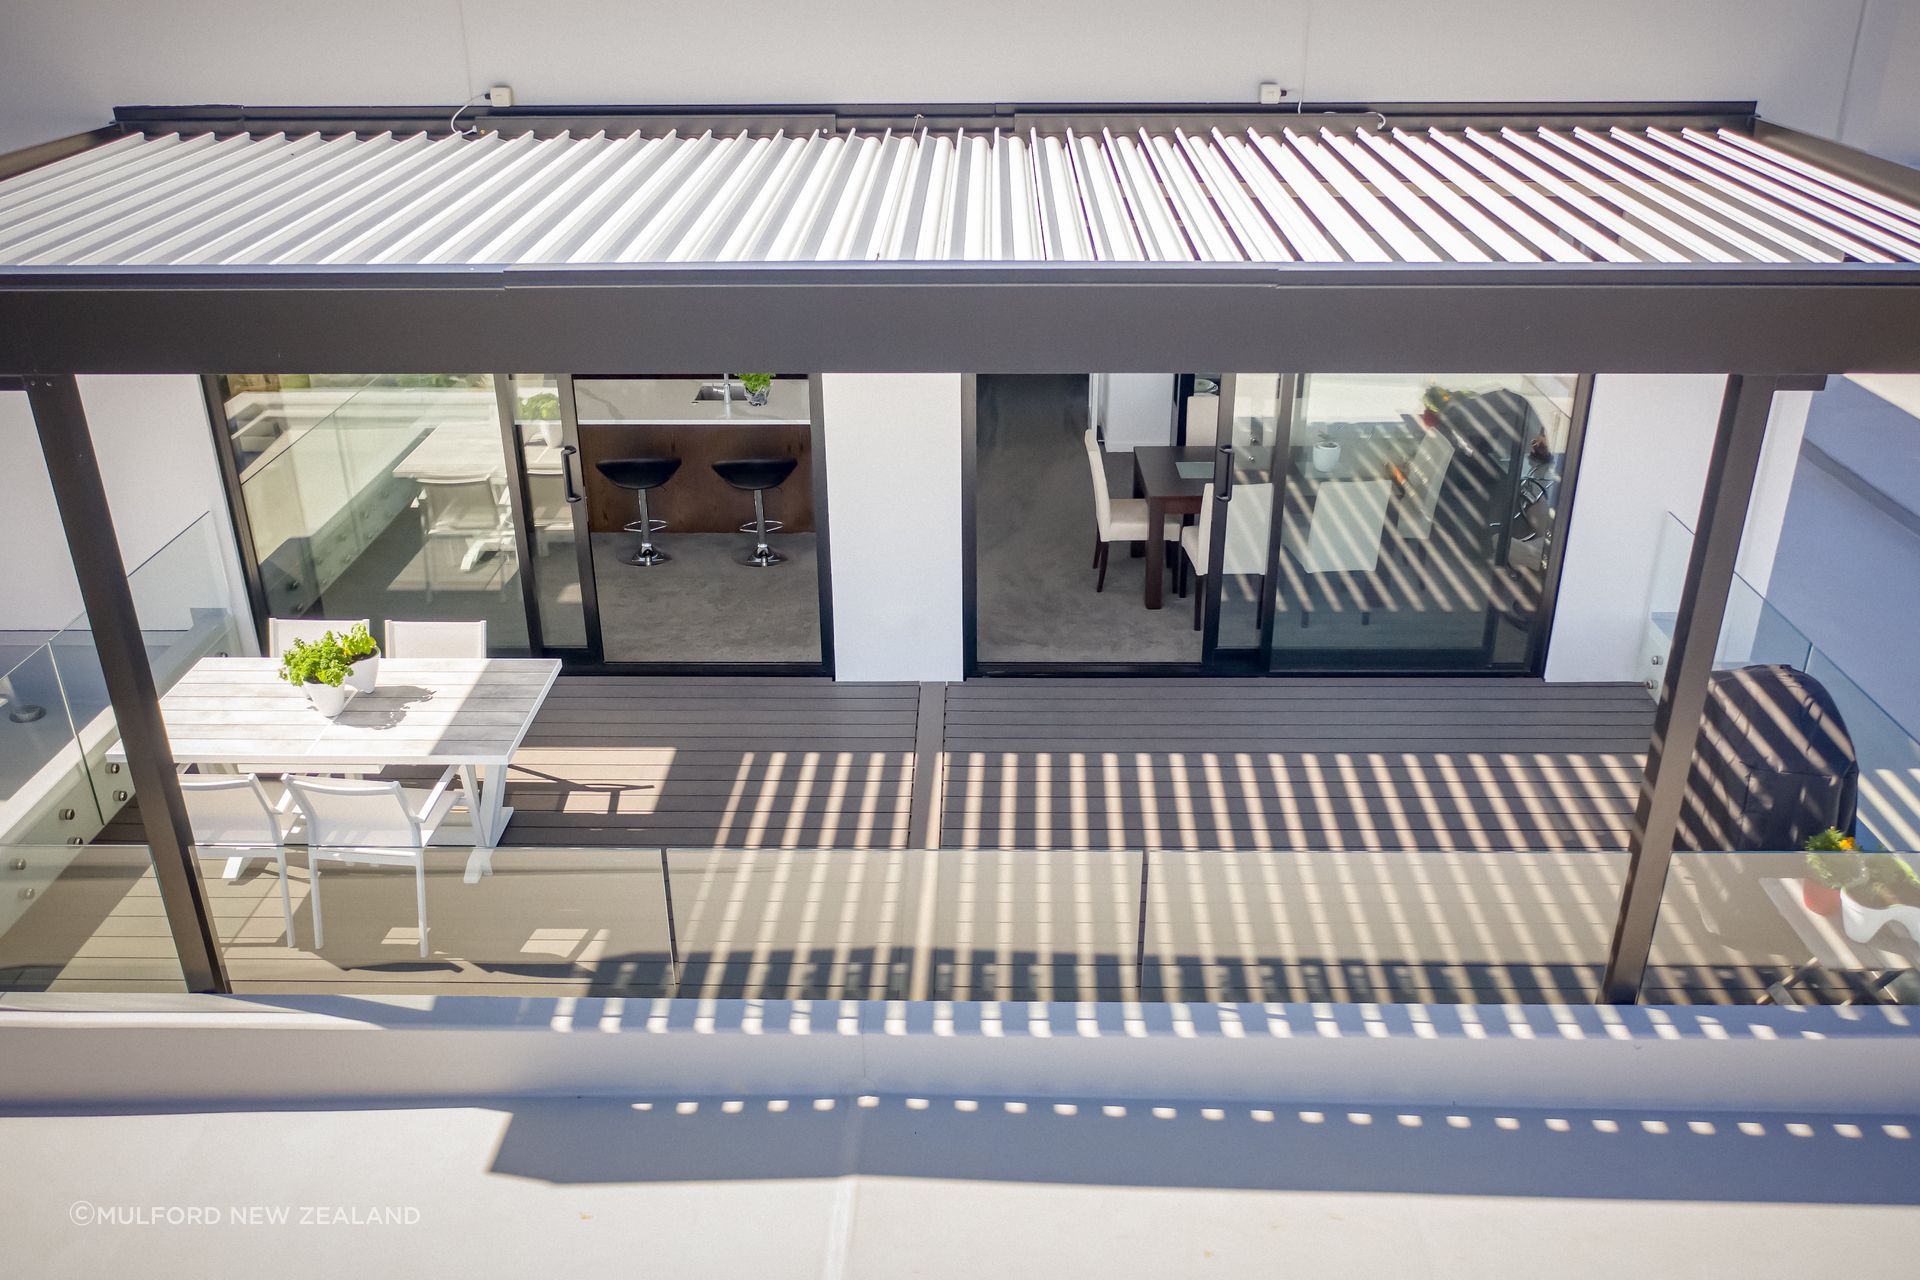 The streamlined design of Futurewood composite decking is perfectly matched with the wall-mounted pergola, creating a sanctuary away from the sun.